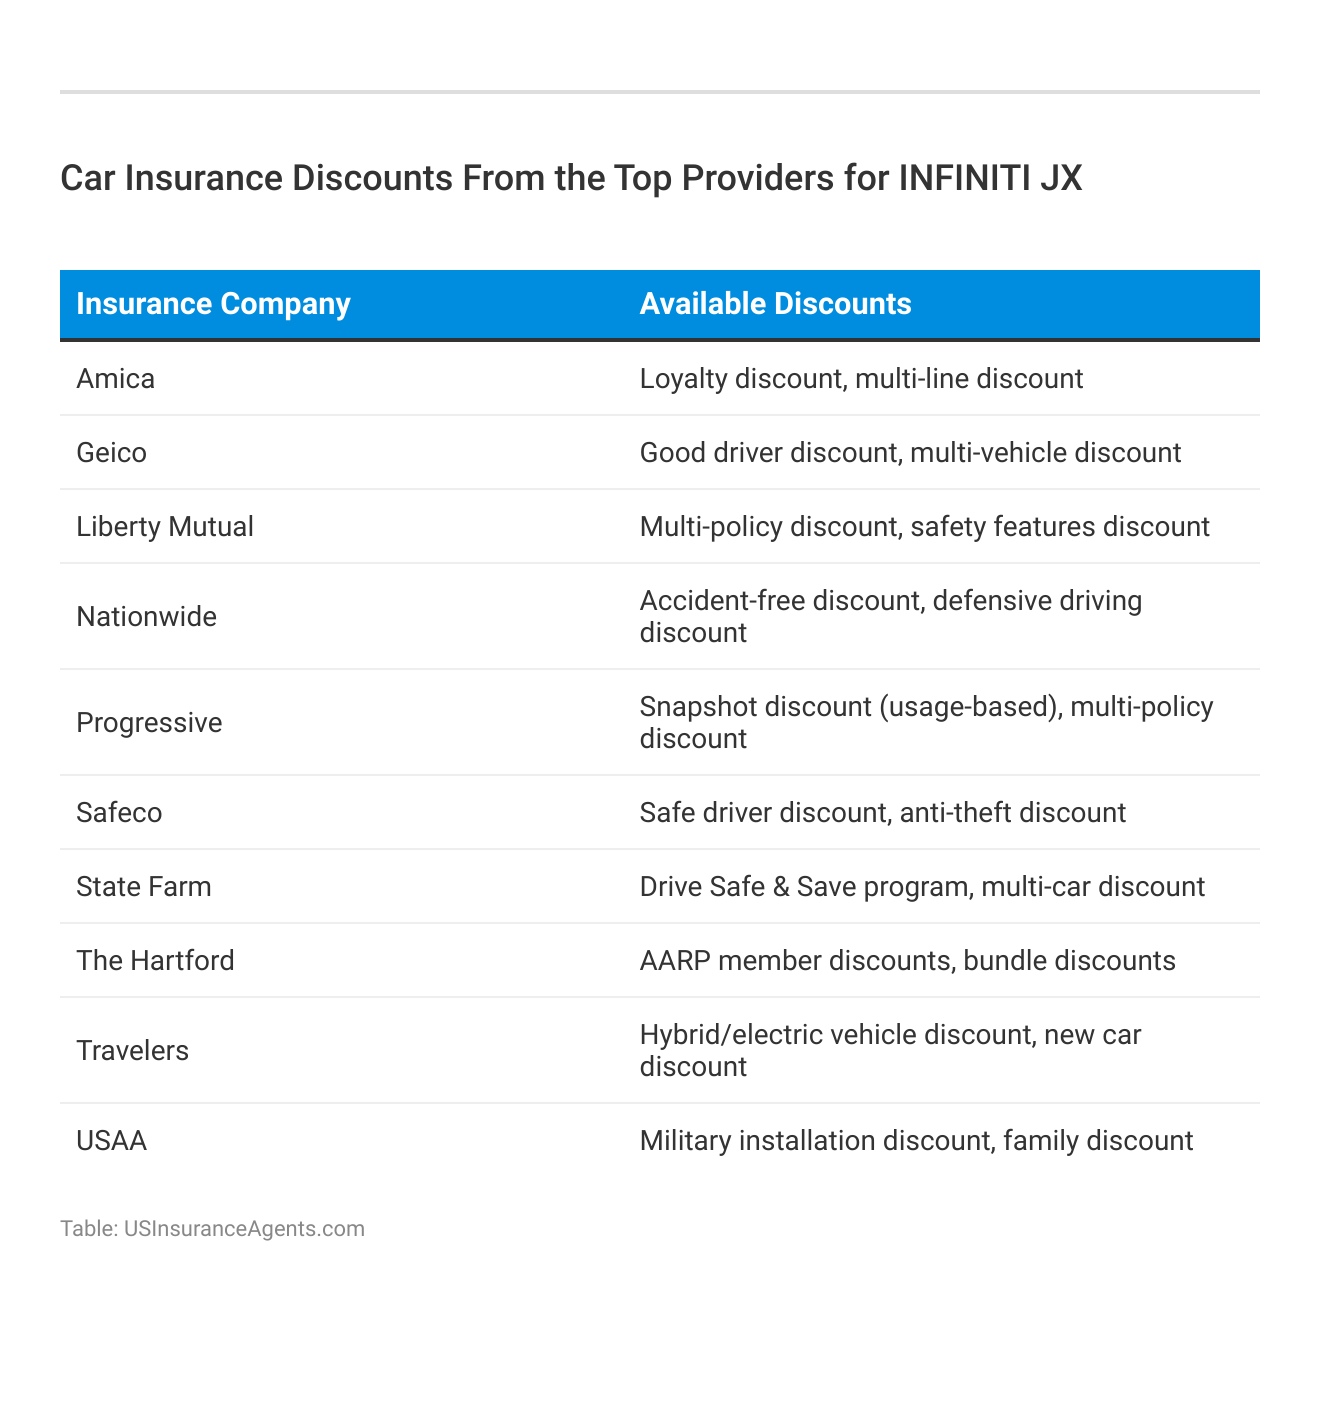 <h3>Car Insurance Discounts From the Top Providers for INFINITI JX</h3>